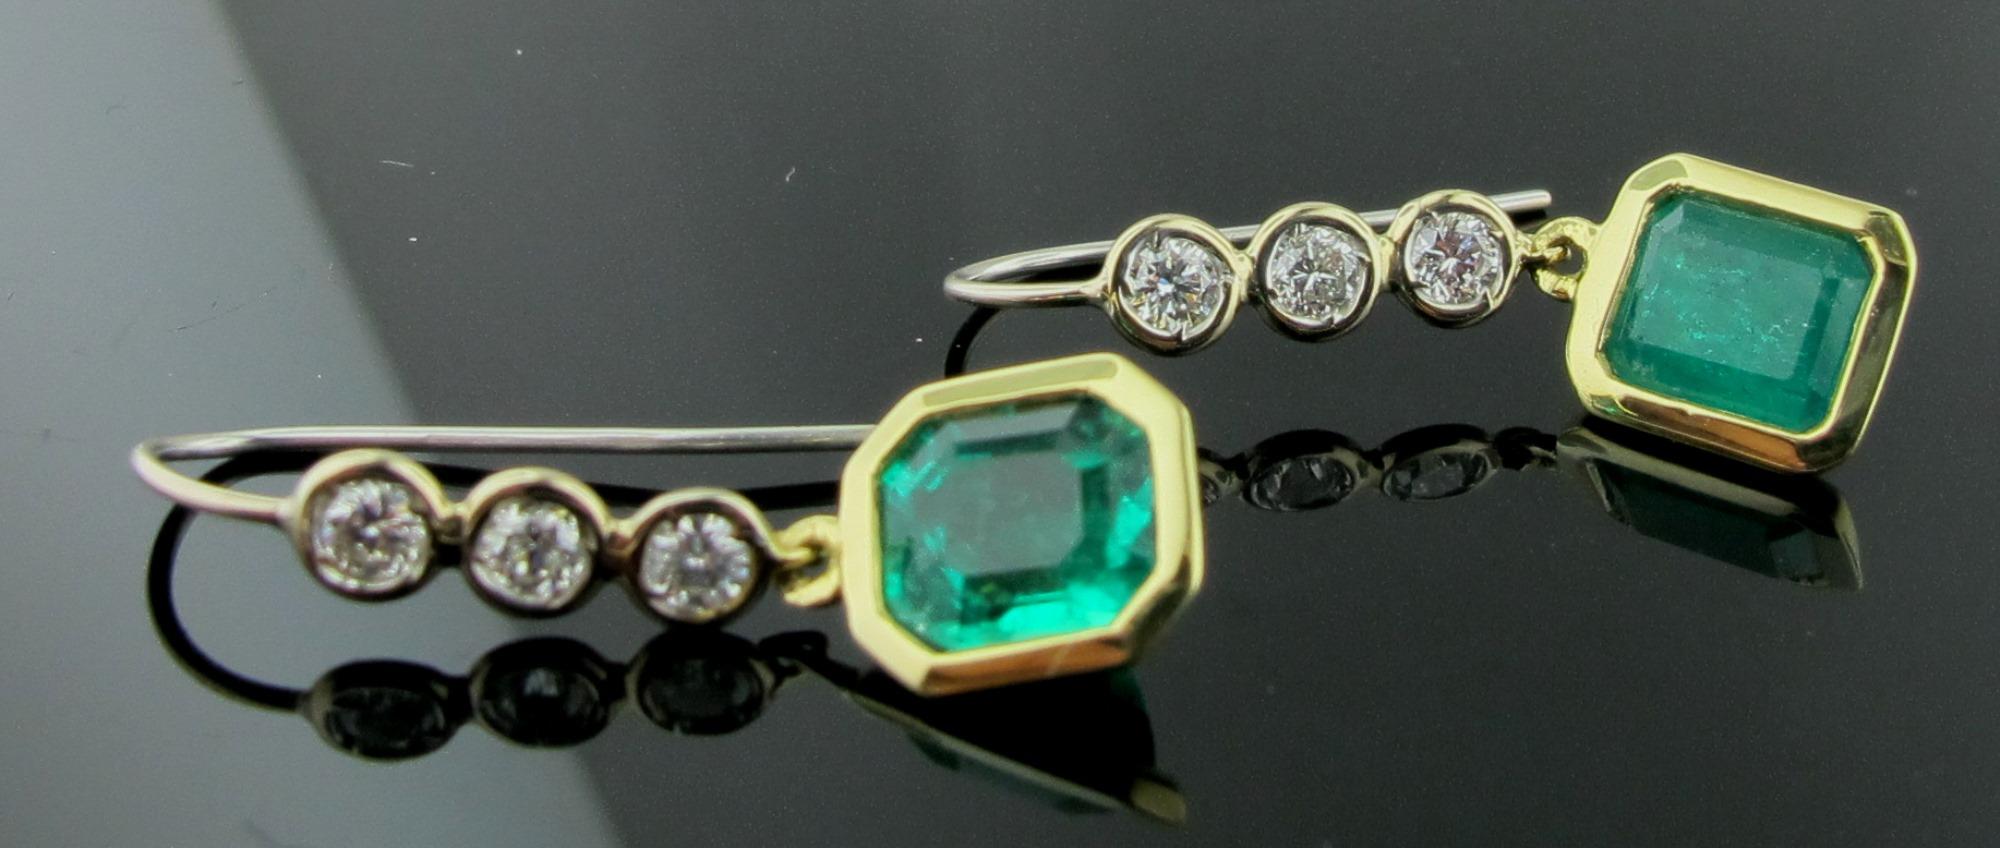 Emerald Cut Emerald and Diamond Drop Earrings in 14 Karat White and Yellow Gold For Sale